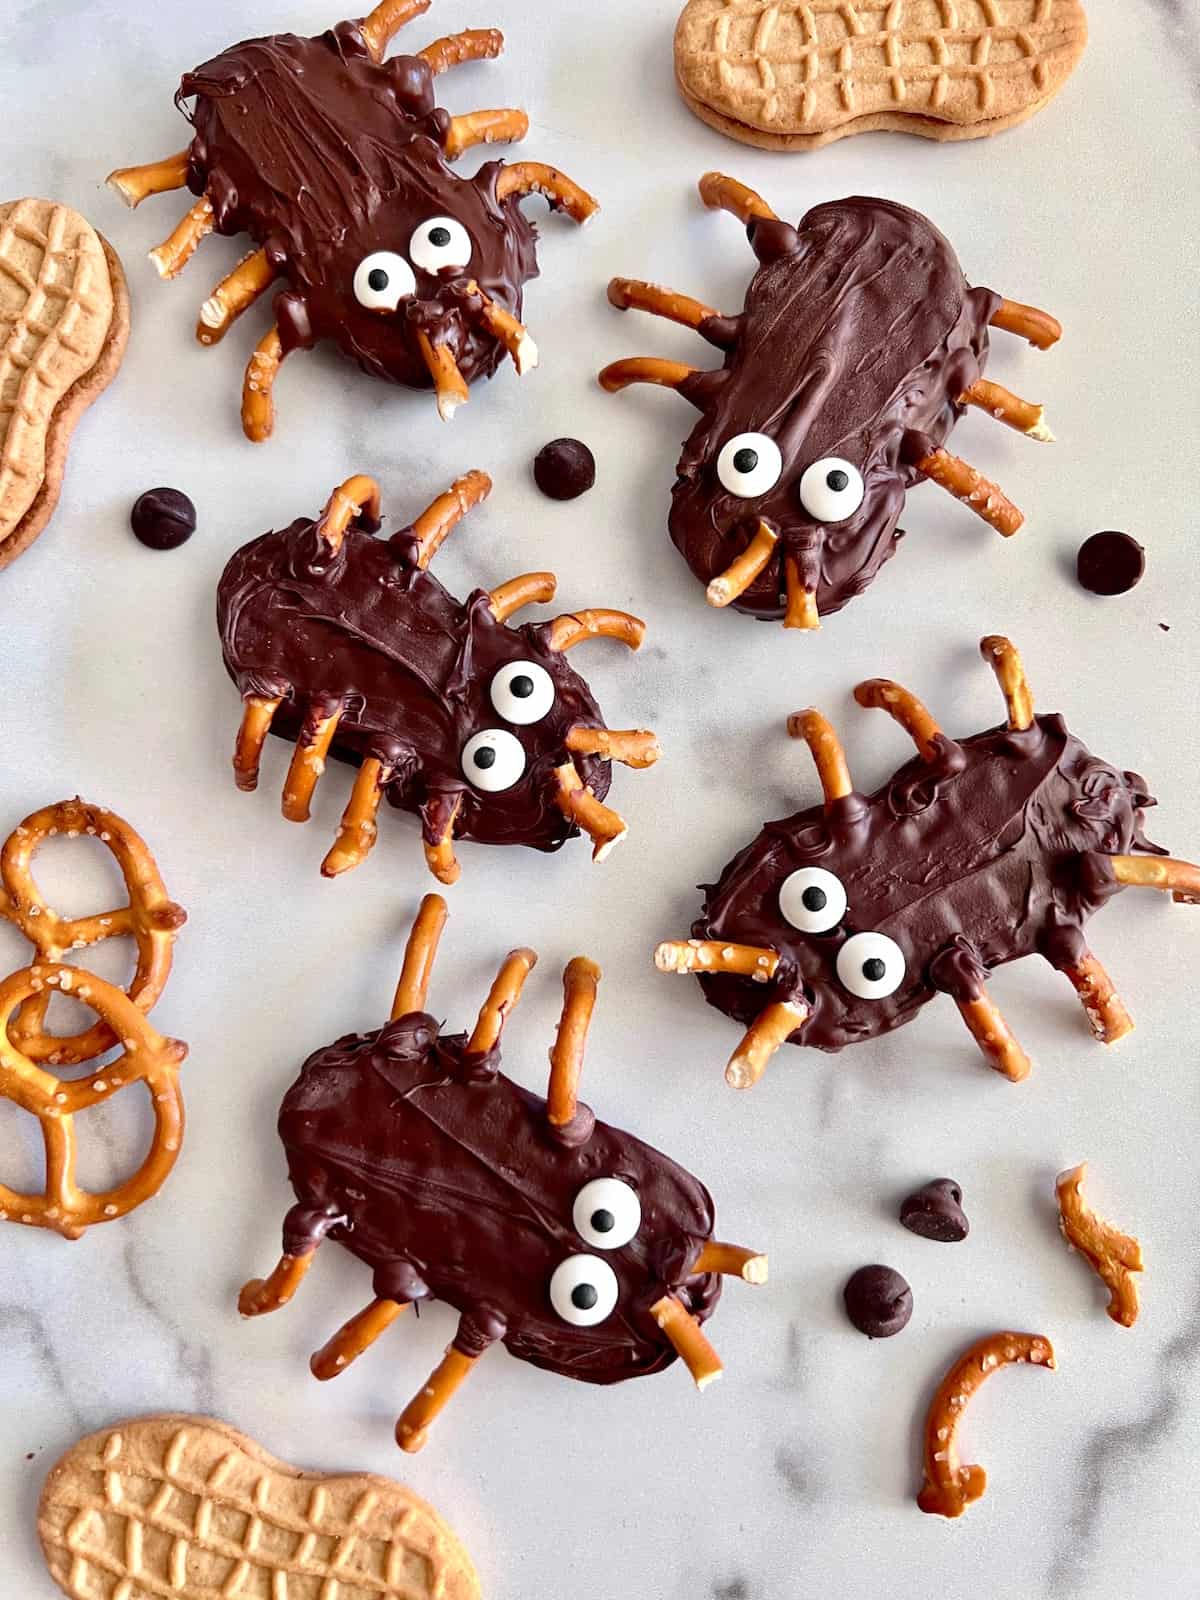 5 bug and spider peanut butter chocolate cookies ready to eat. 